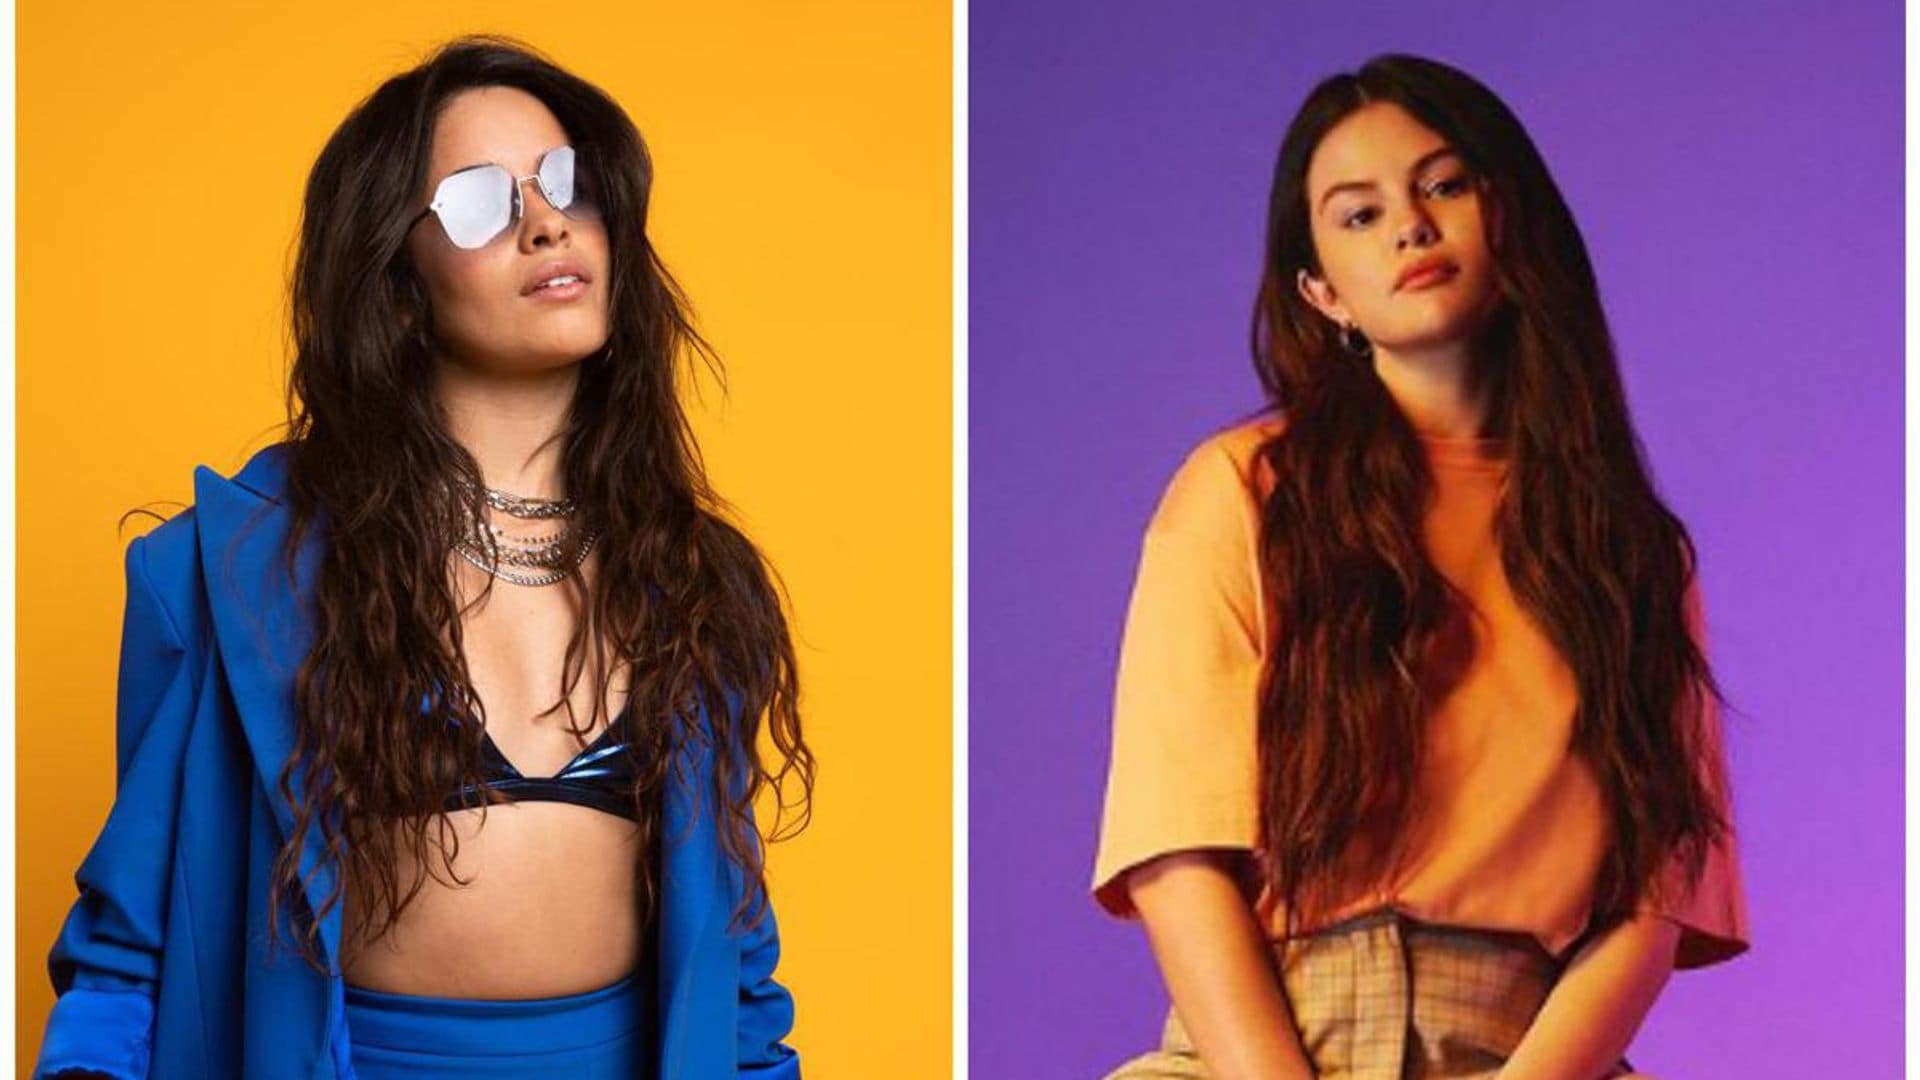 Camila Cabello reveals to Selena Gomez what anxiety feels like for her in Wondermind May issue